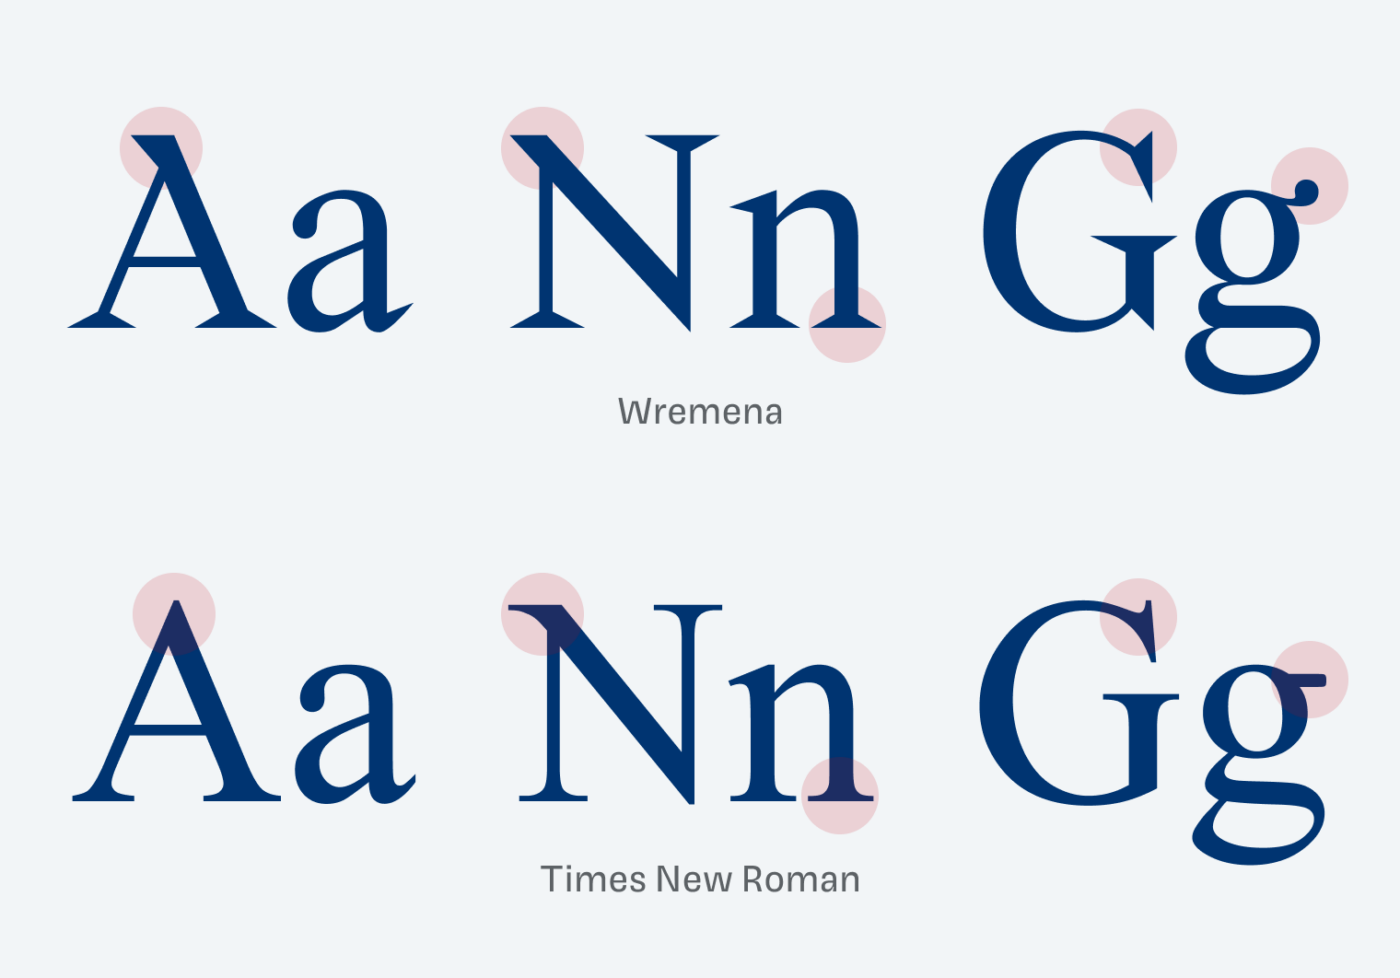 Showing details of the typeface Wremena compared to Times New Roman